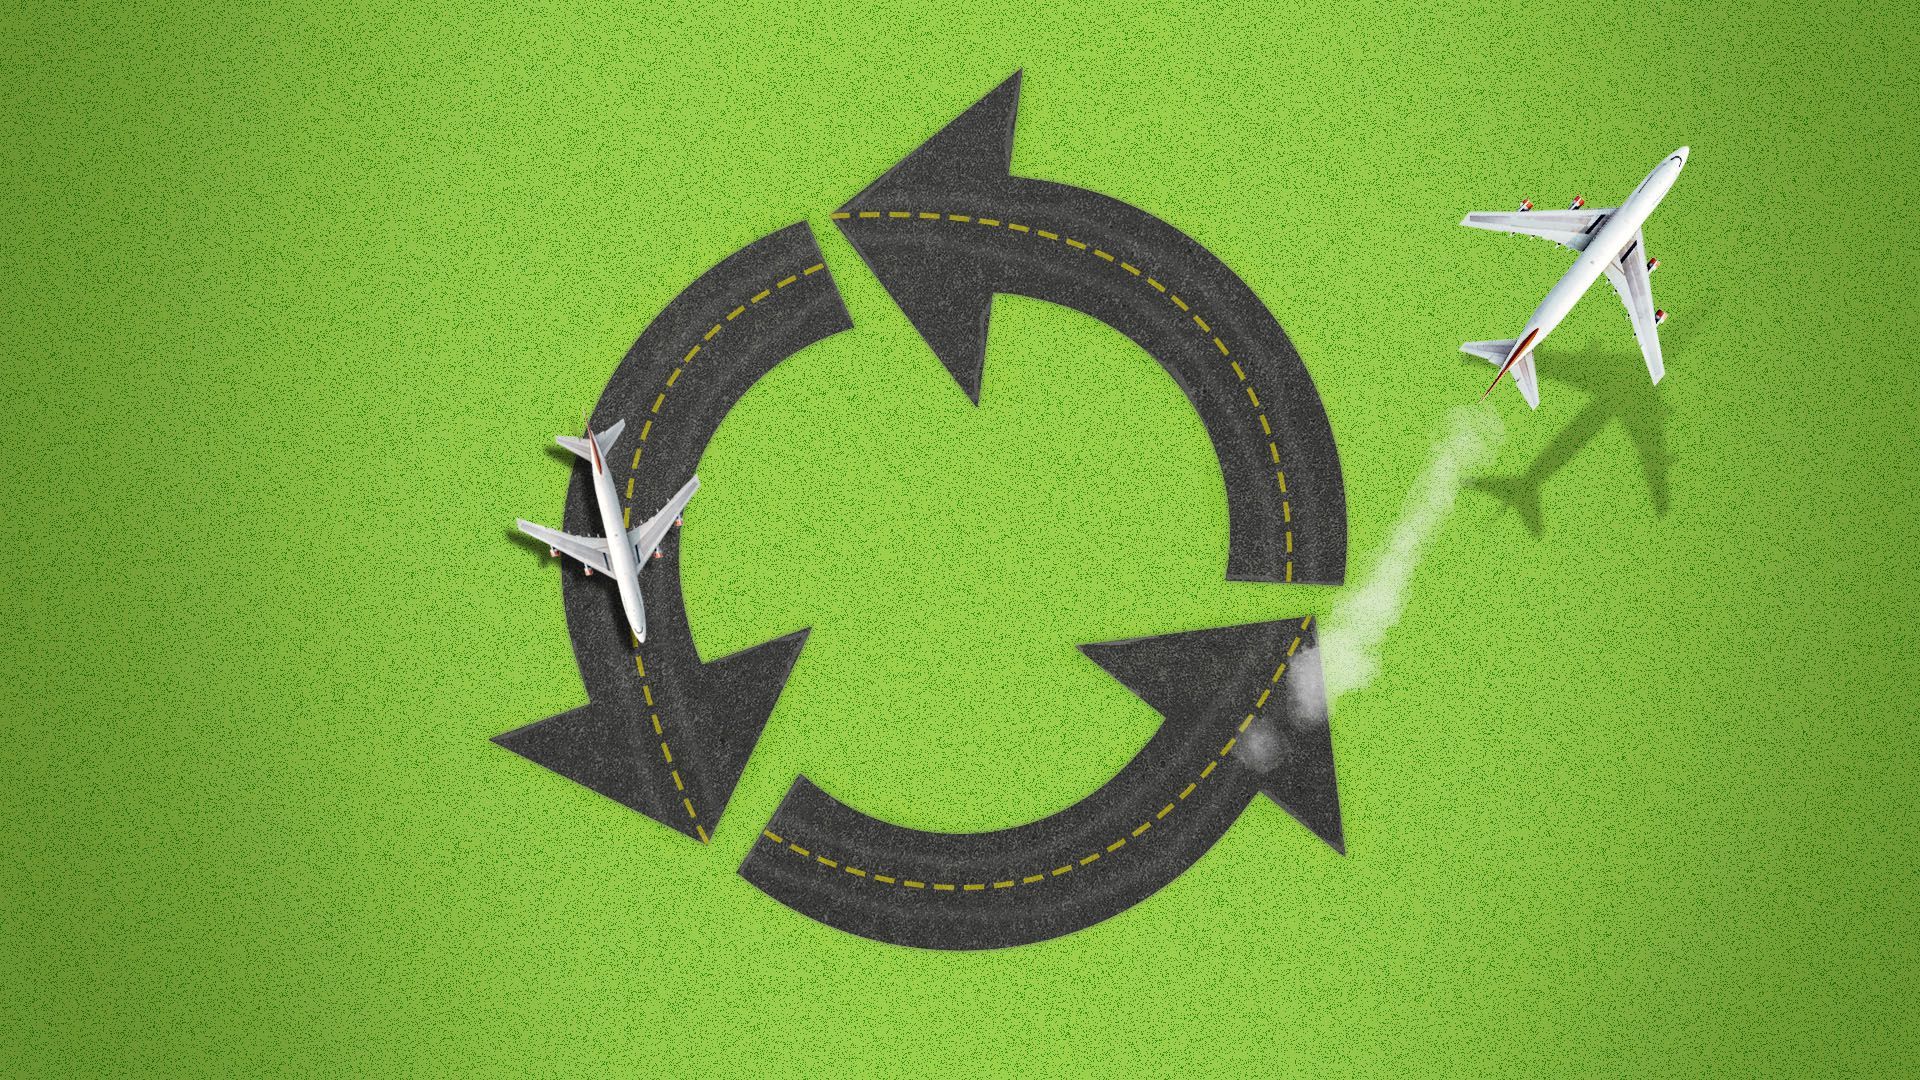 Illustration of an airplane runway in the shape of a recycling symbol